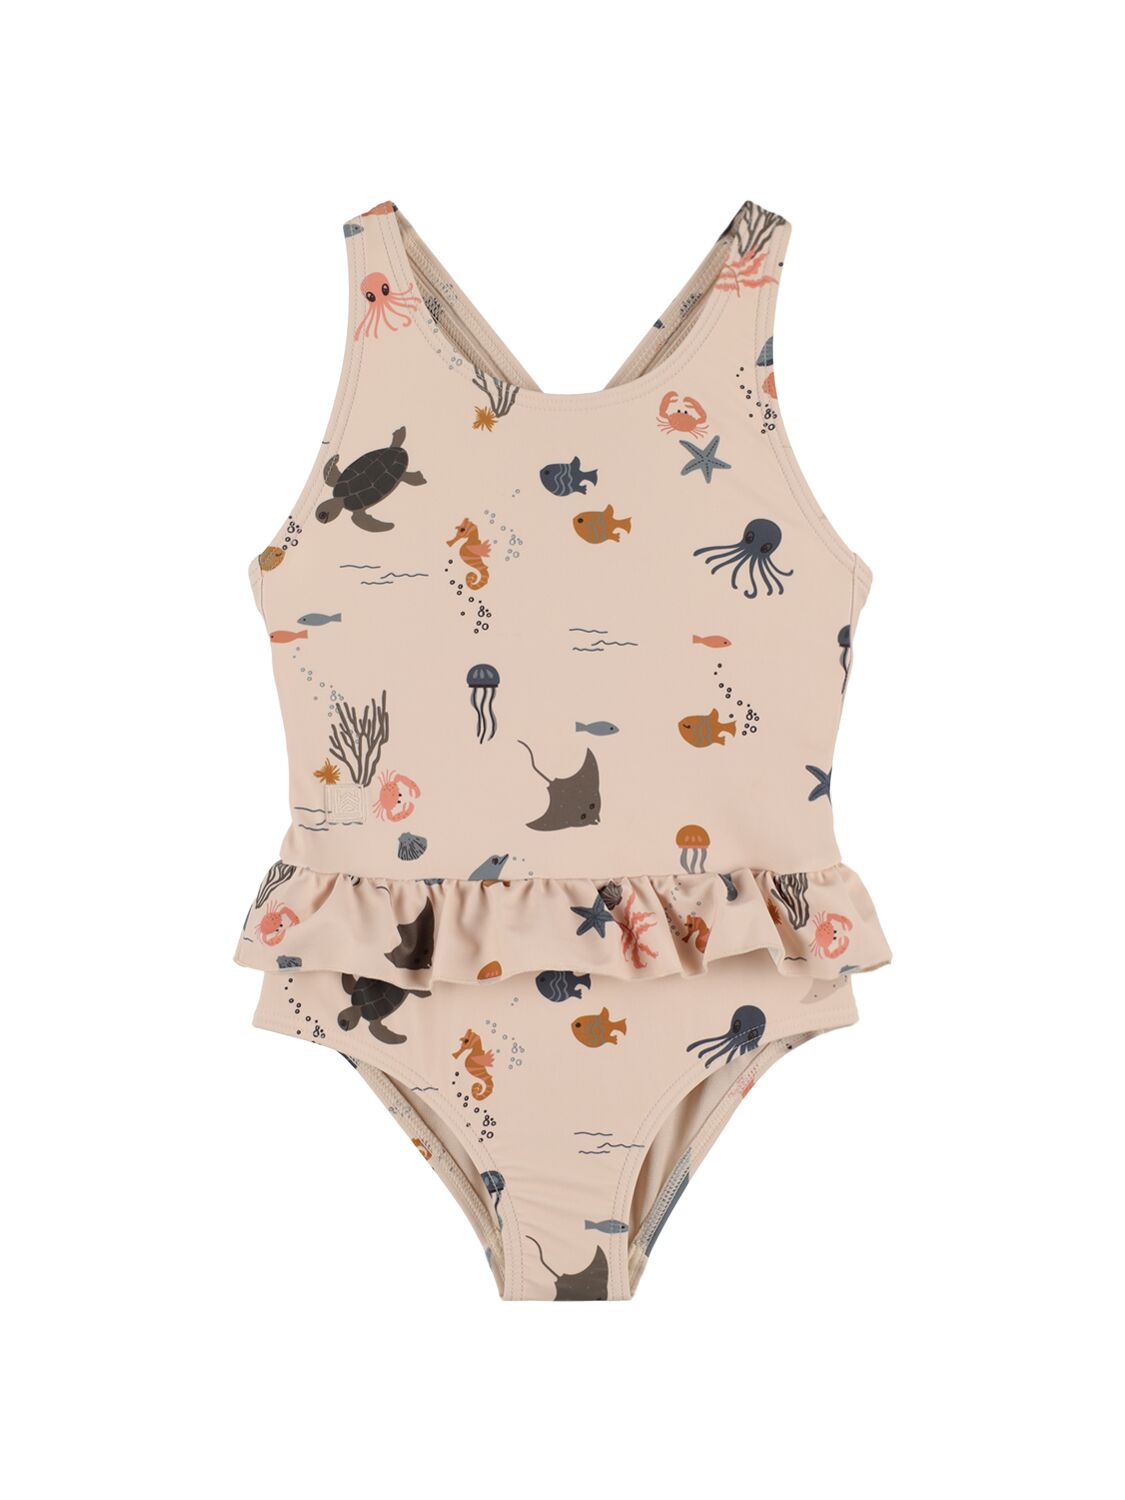 Liewood Kids' Sea Recycled Nylon One Piece Swimsuit In 多色